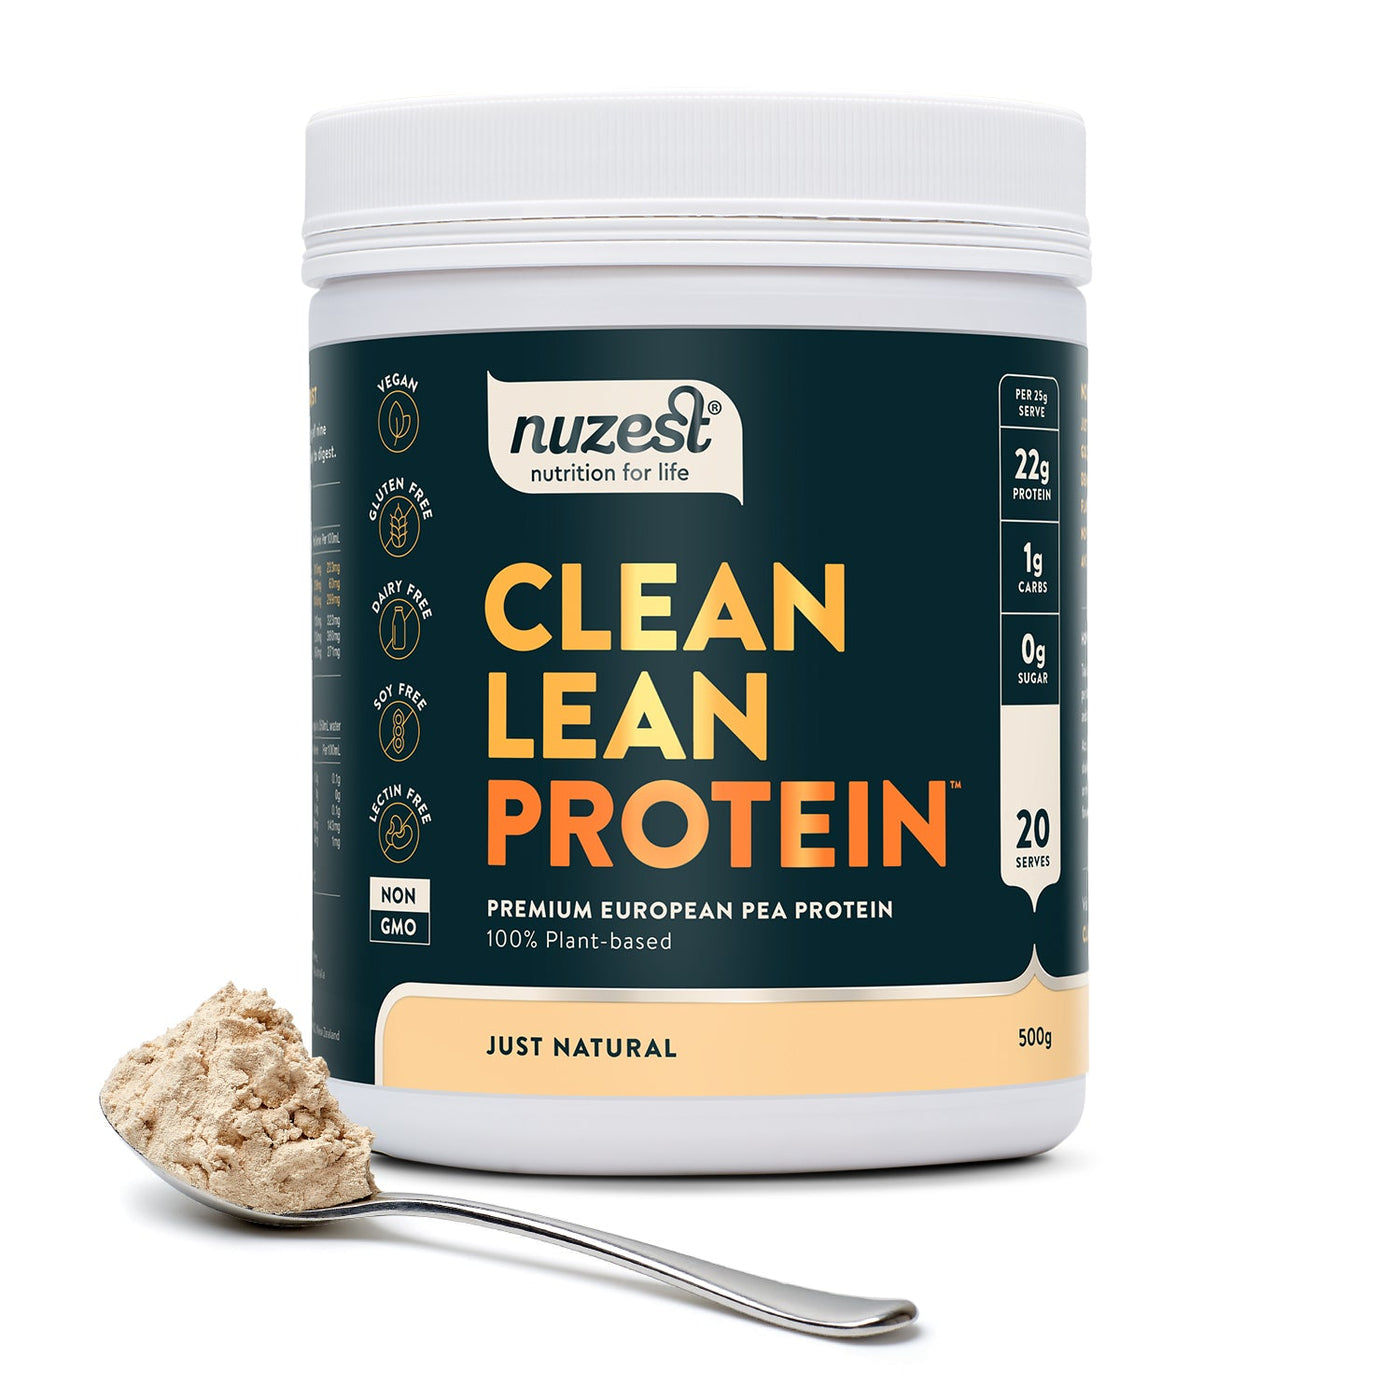 Copy of Nuzest Clean Lean Protein Bars, Peanut Butter & Chocolate (Box of 12 Bars)